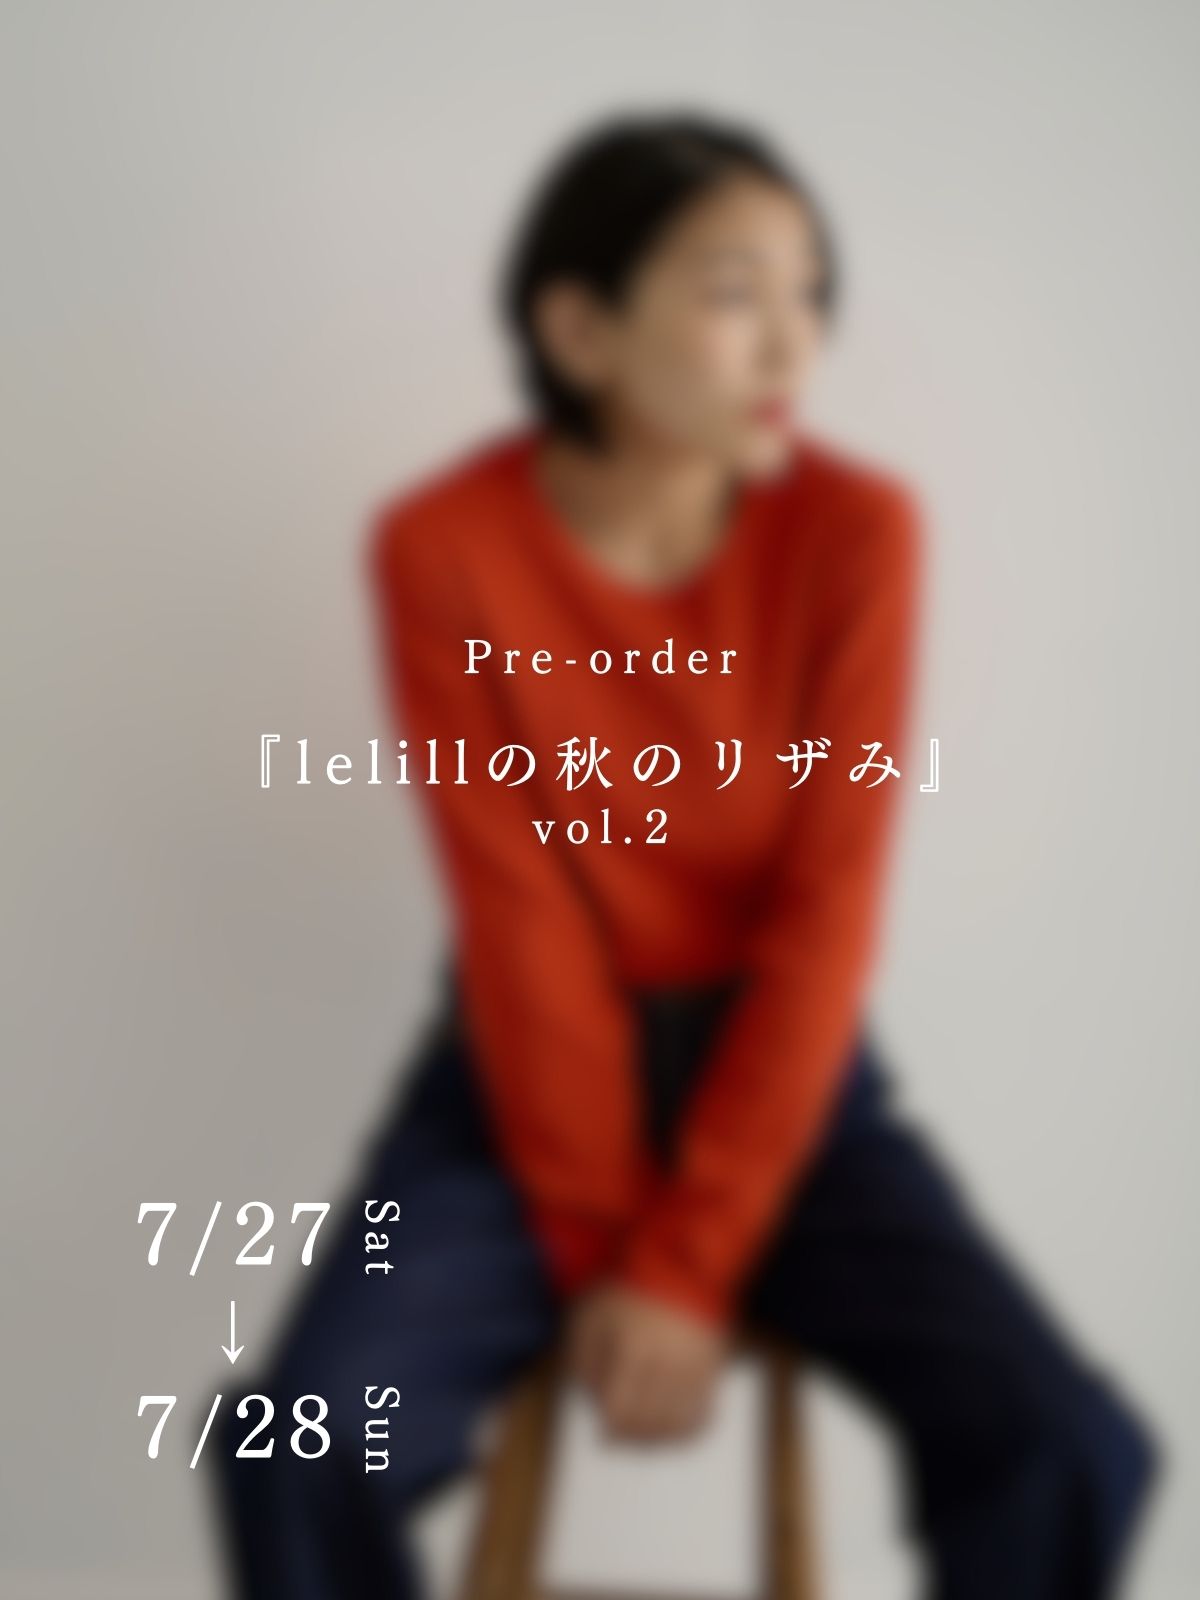 SPECIAL EVENT｜PRE-ORDER ｜『lelillの秋のリザみ vol.2』at lelill showroom 広尾